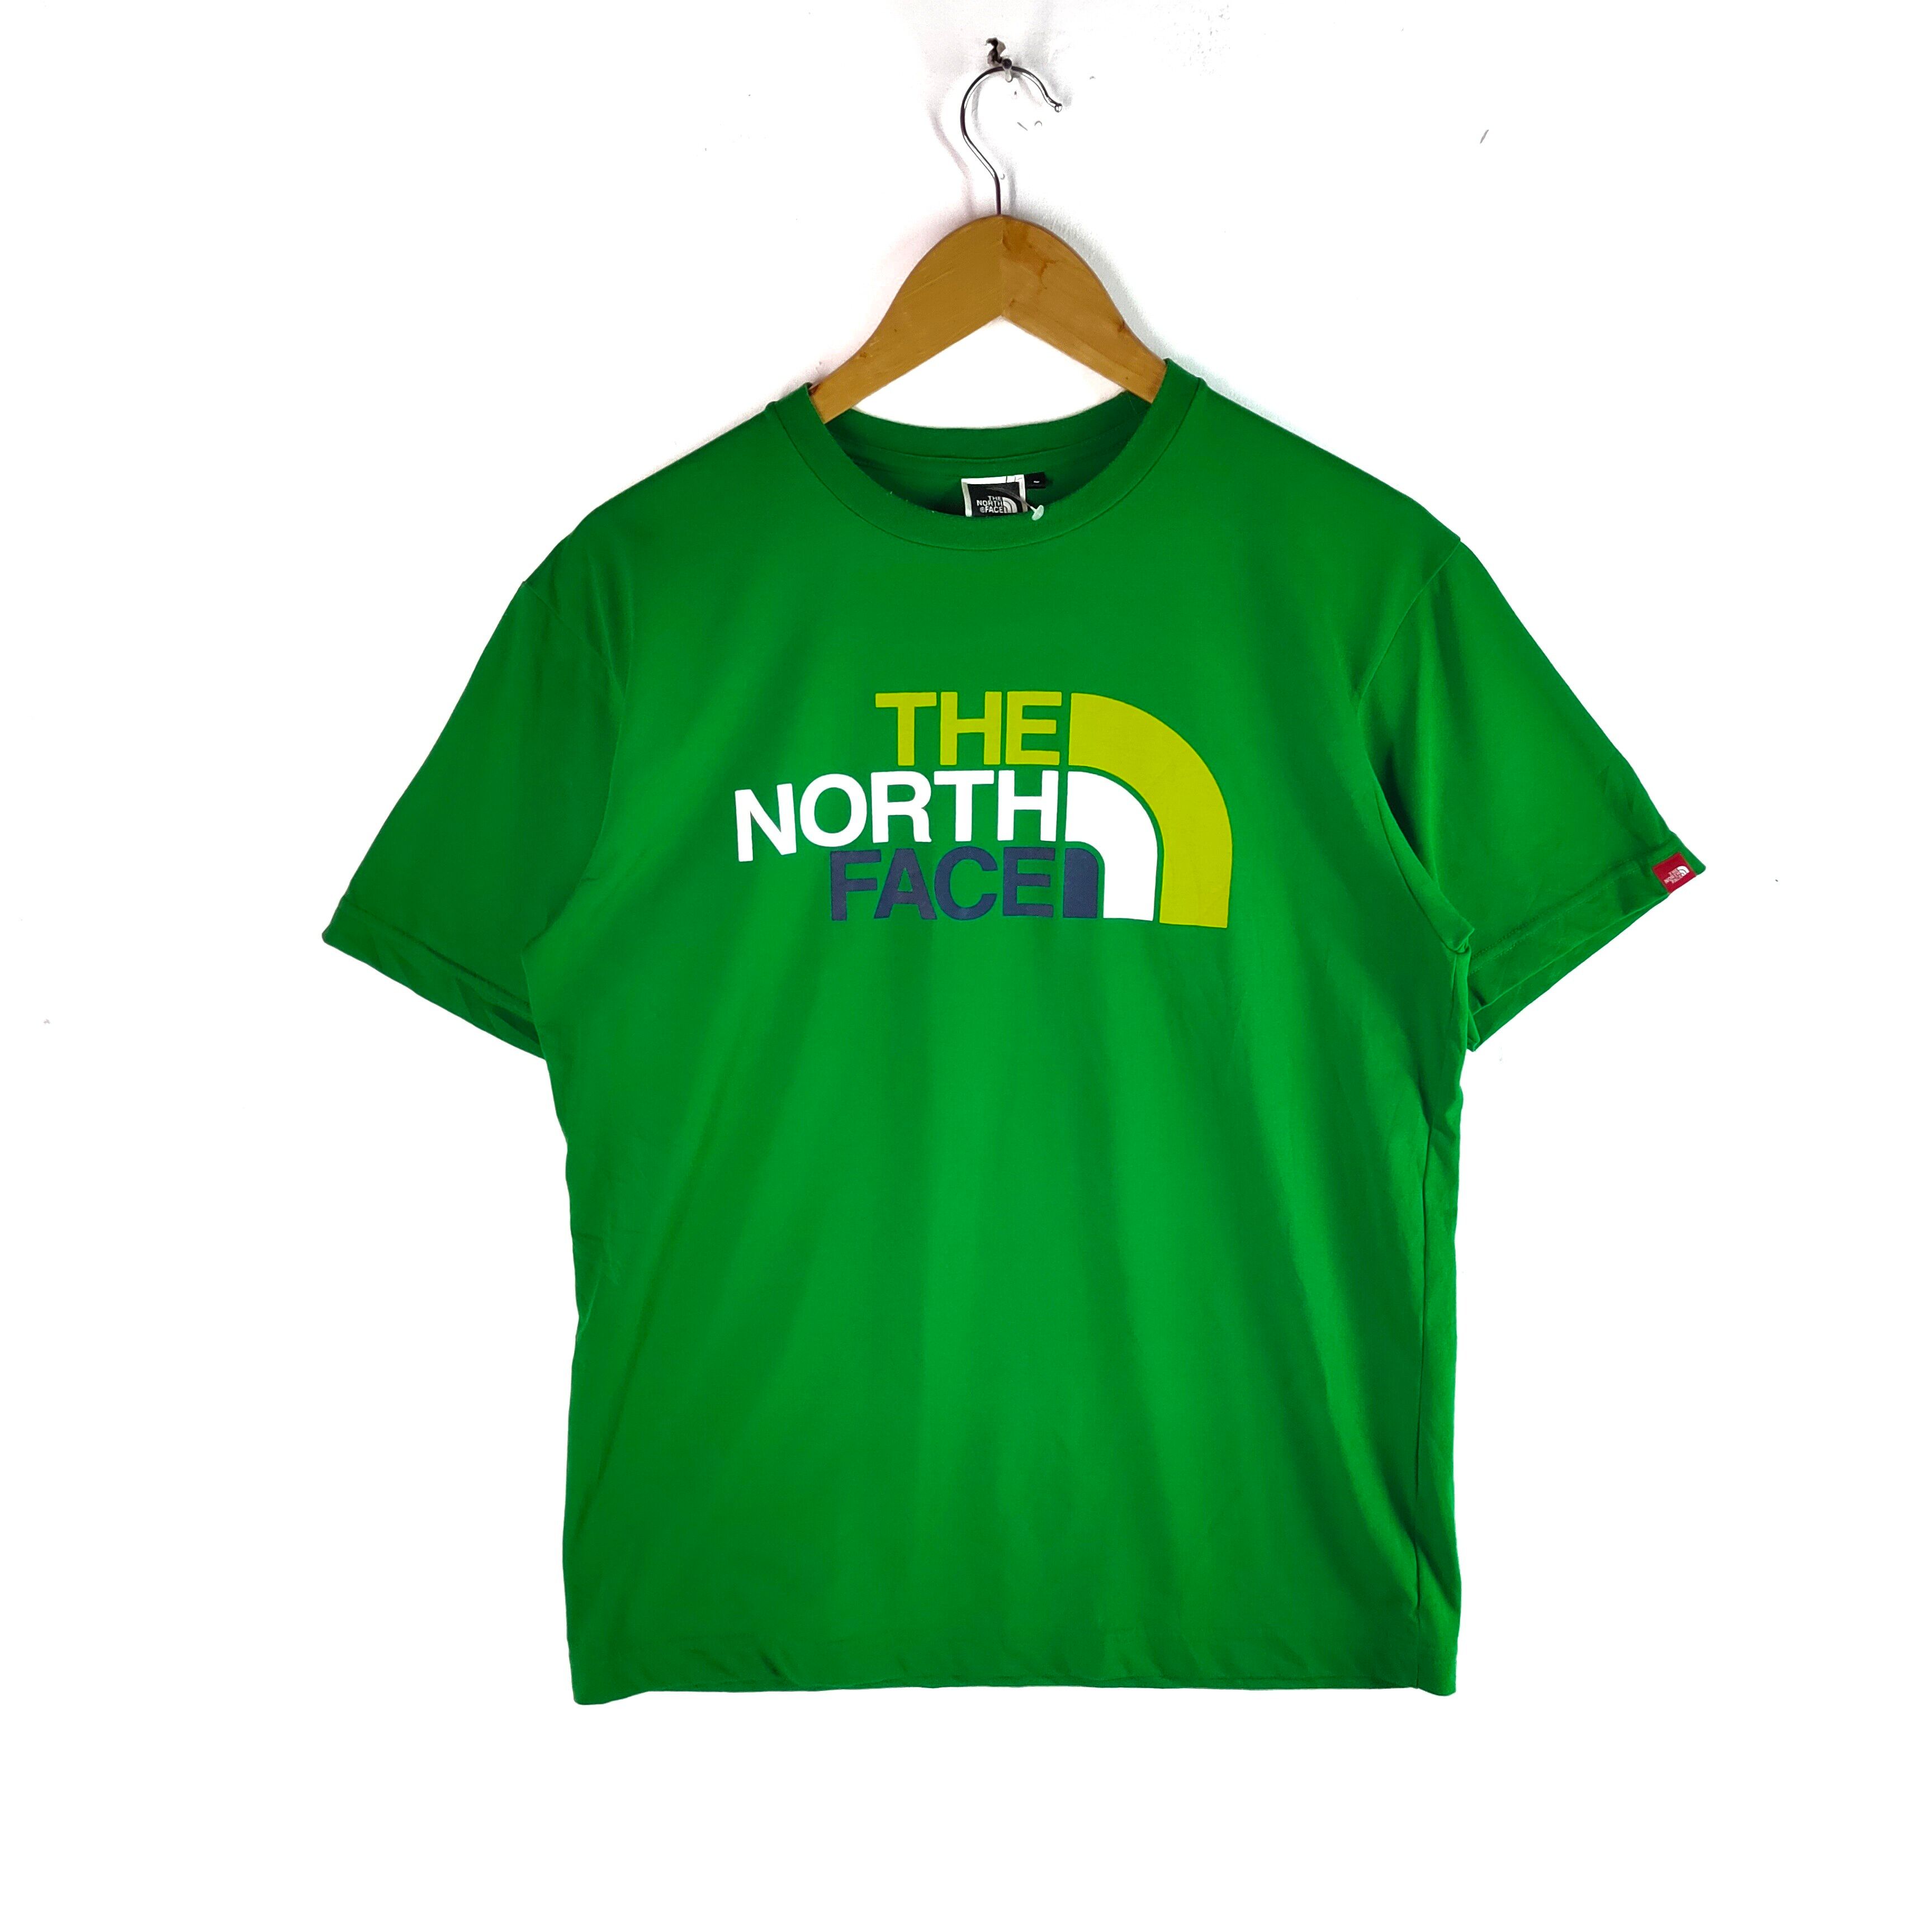 THE NORTH FACE Quick Dry Big Logo Colourful Shirt - 1